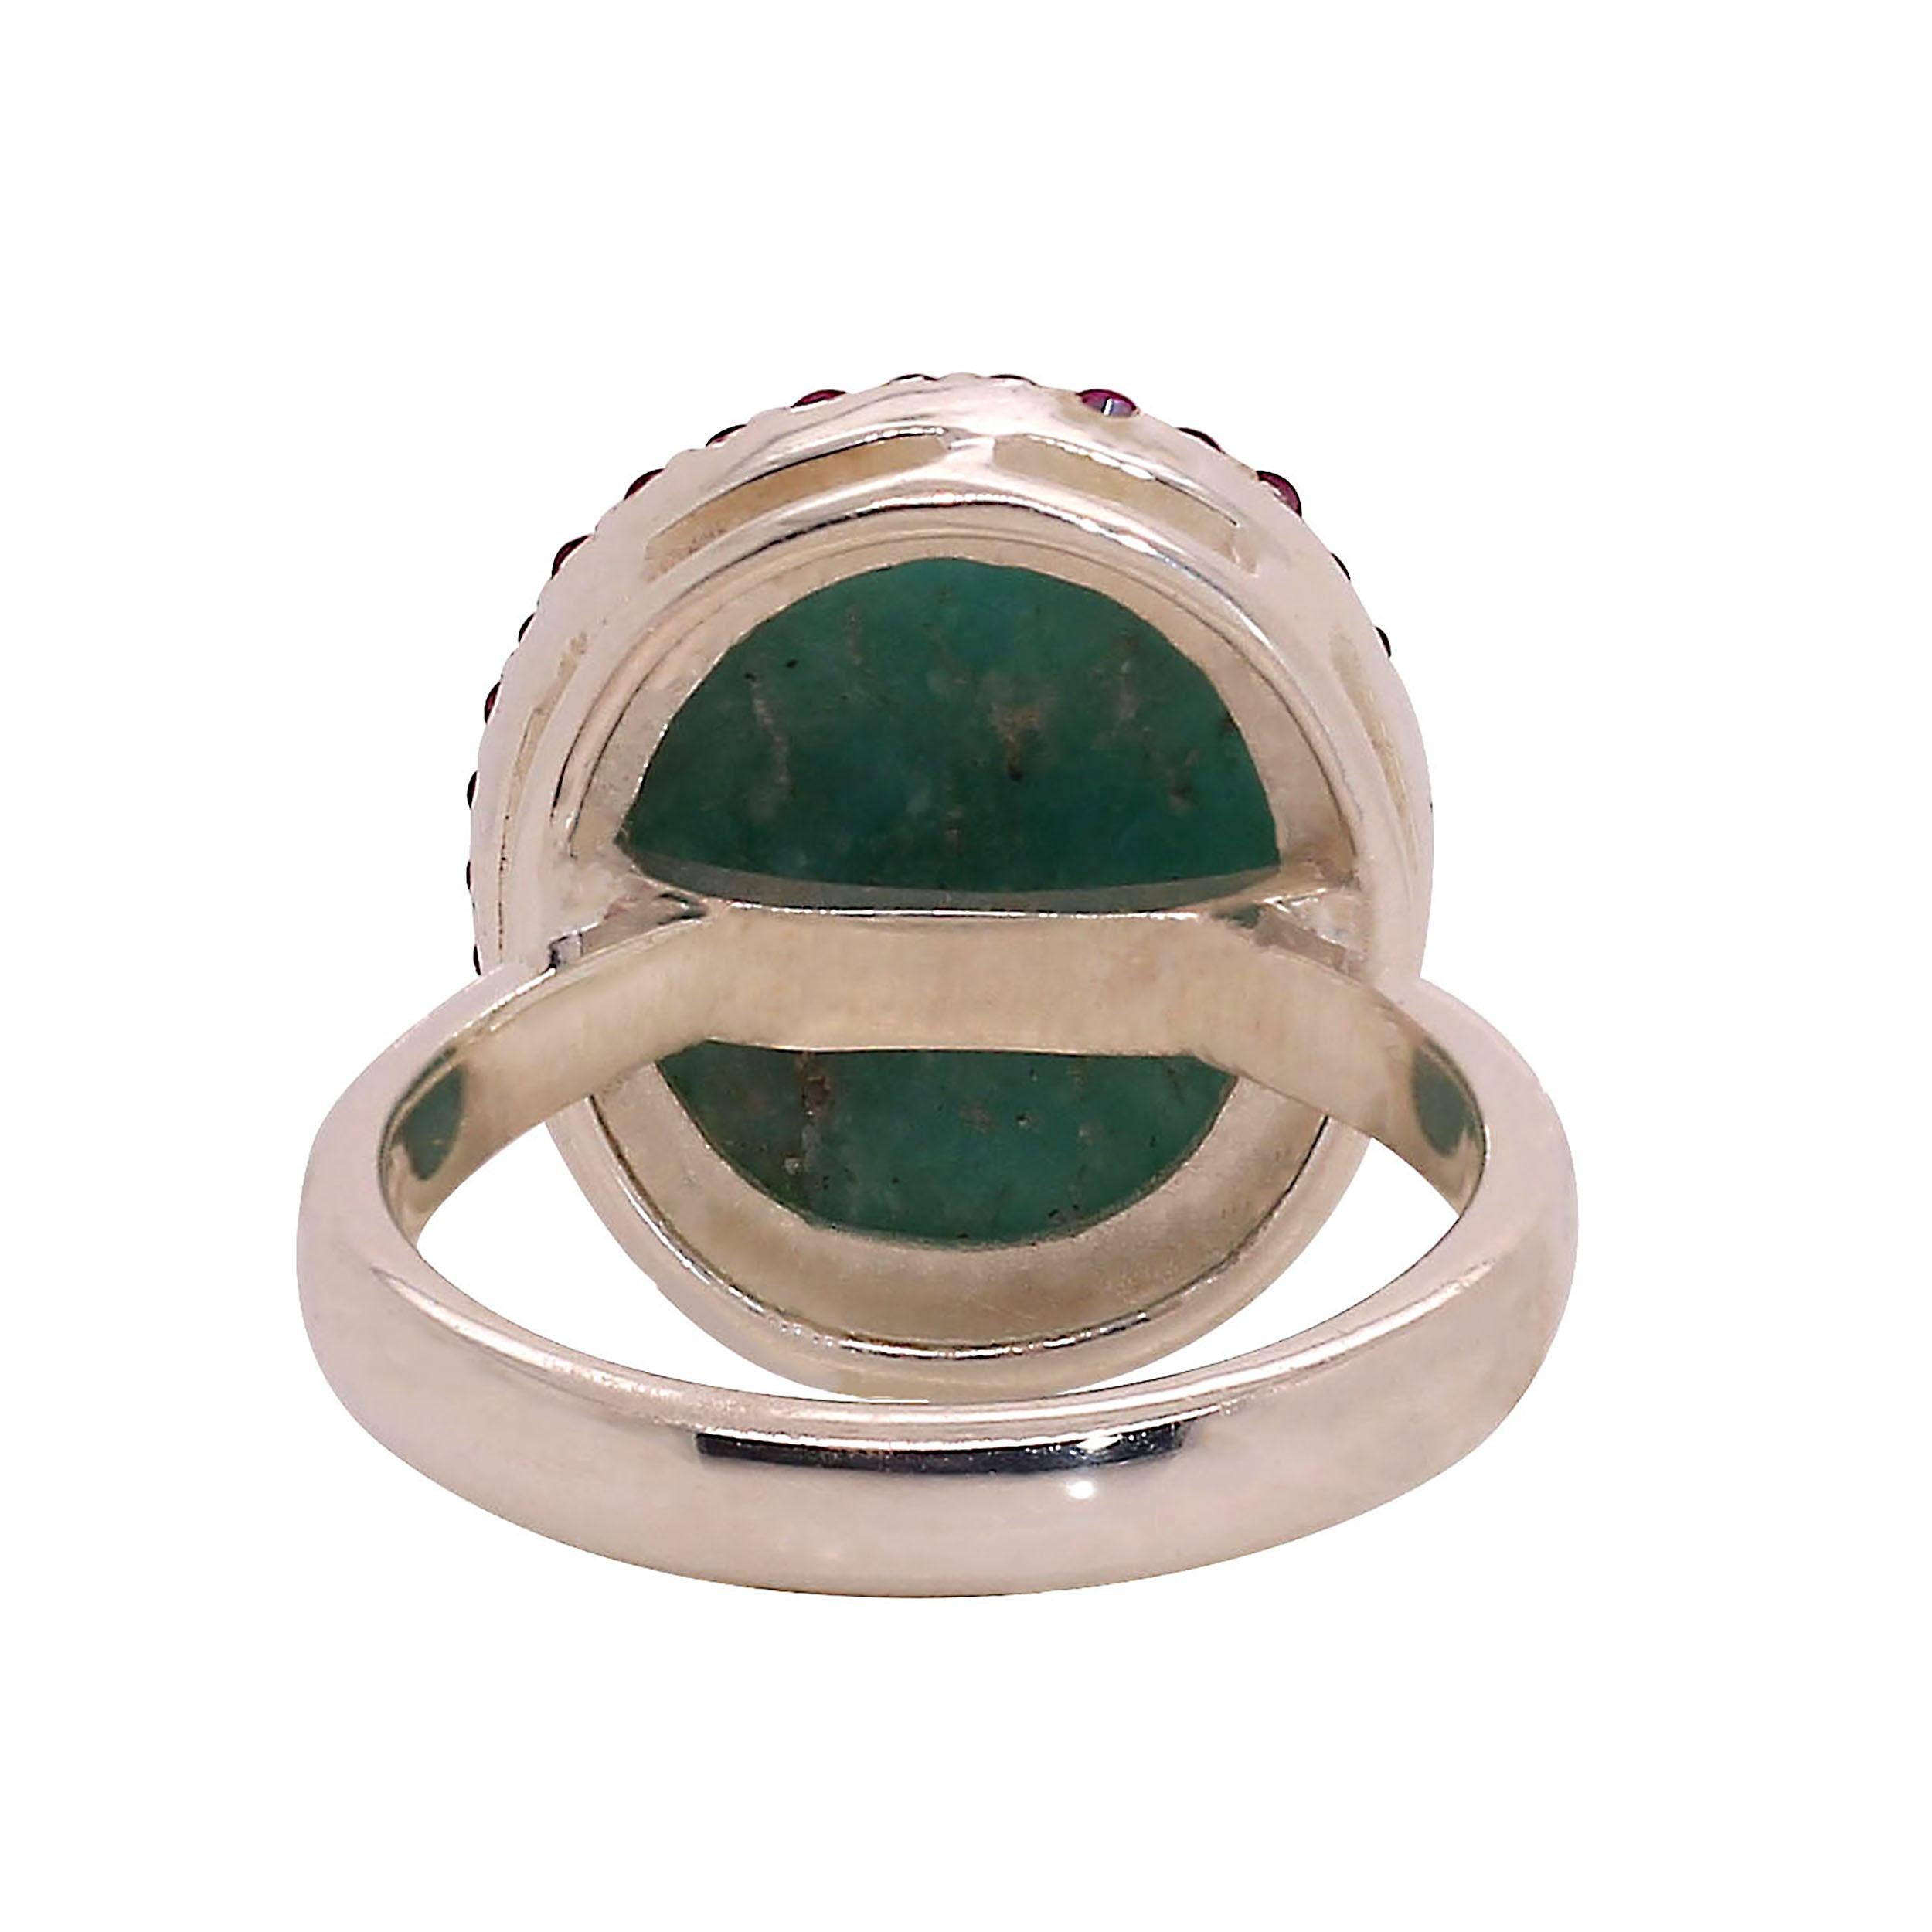 Artisan AJD Ring of Glowing Green Amazonite Surrounded by Pink Sapphires